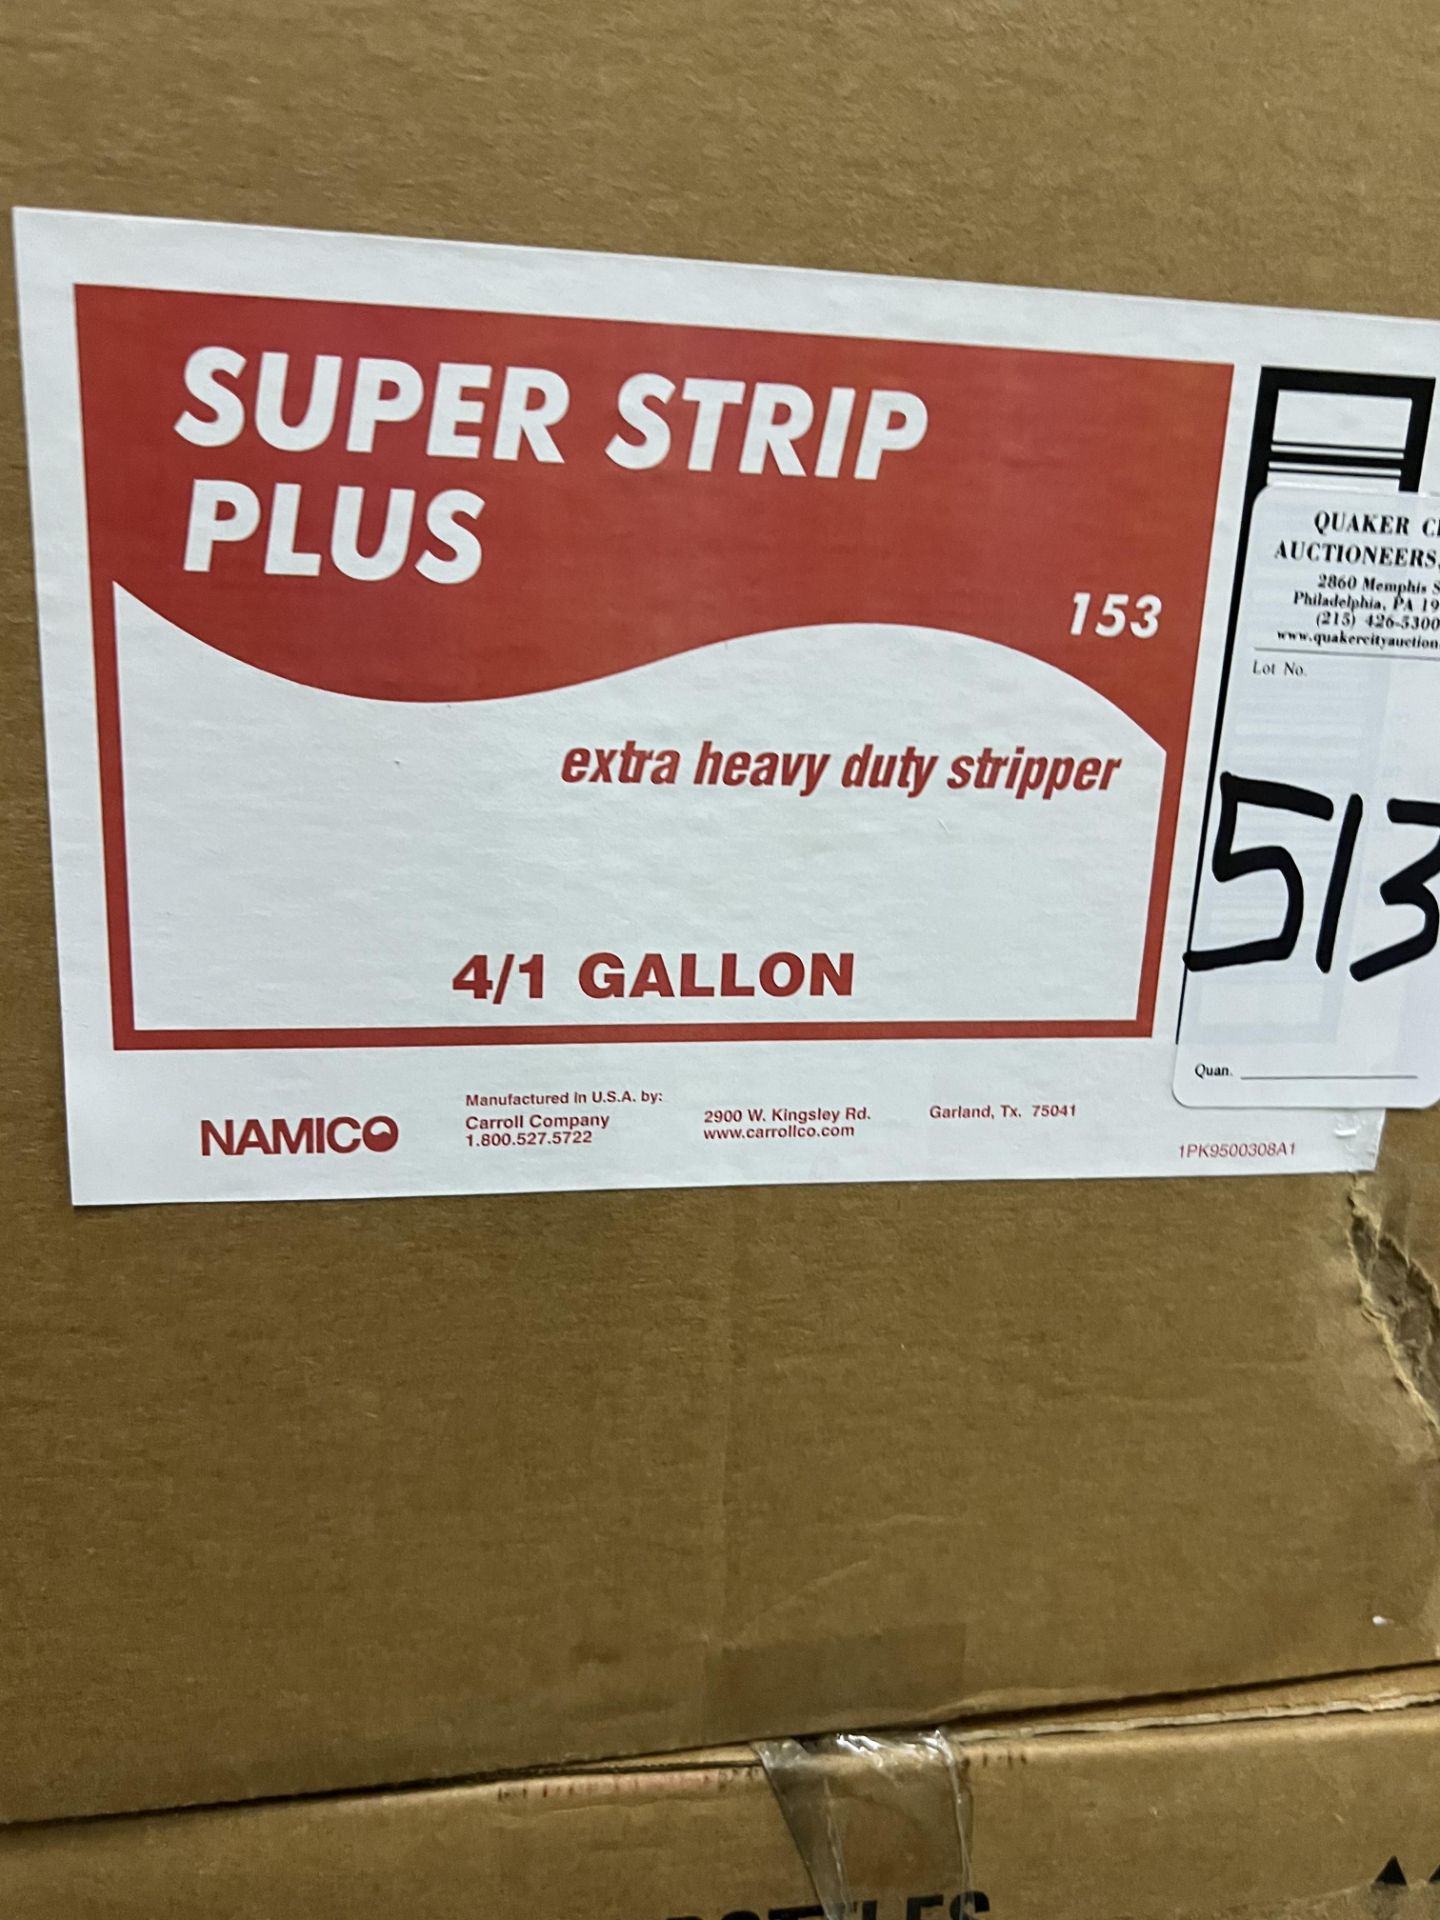 (4) GALLONS OF NAMICO NO. 153 SUPERSTRIP PLUS AND (4) GALLONS OF A55 NON-AMMONITED FLOOR STRIPPER AN - Image 2 of 3